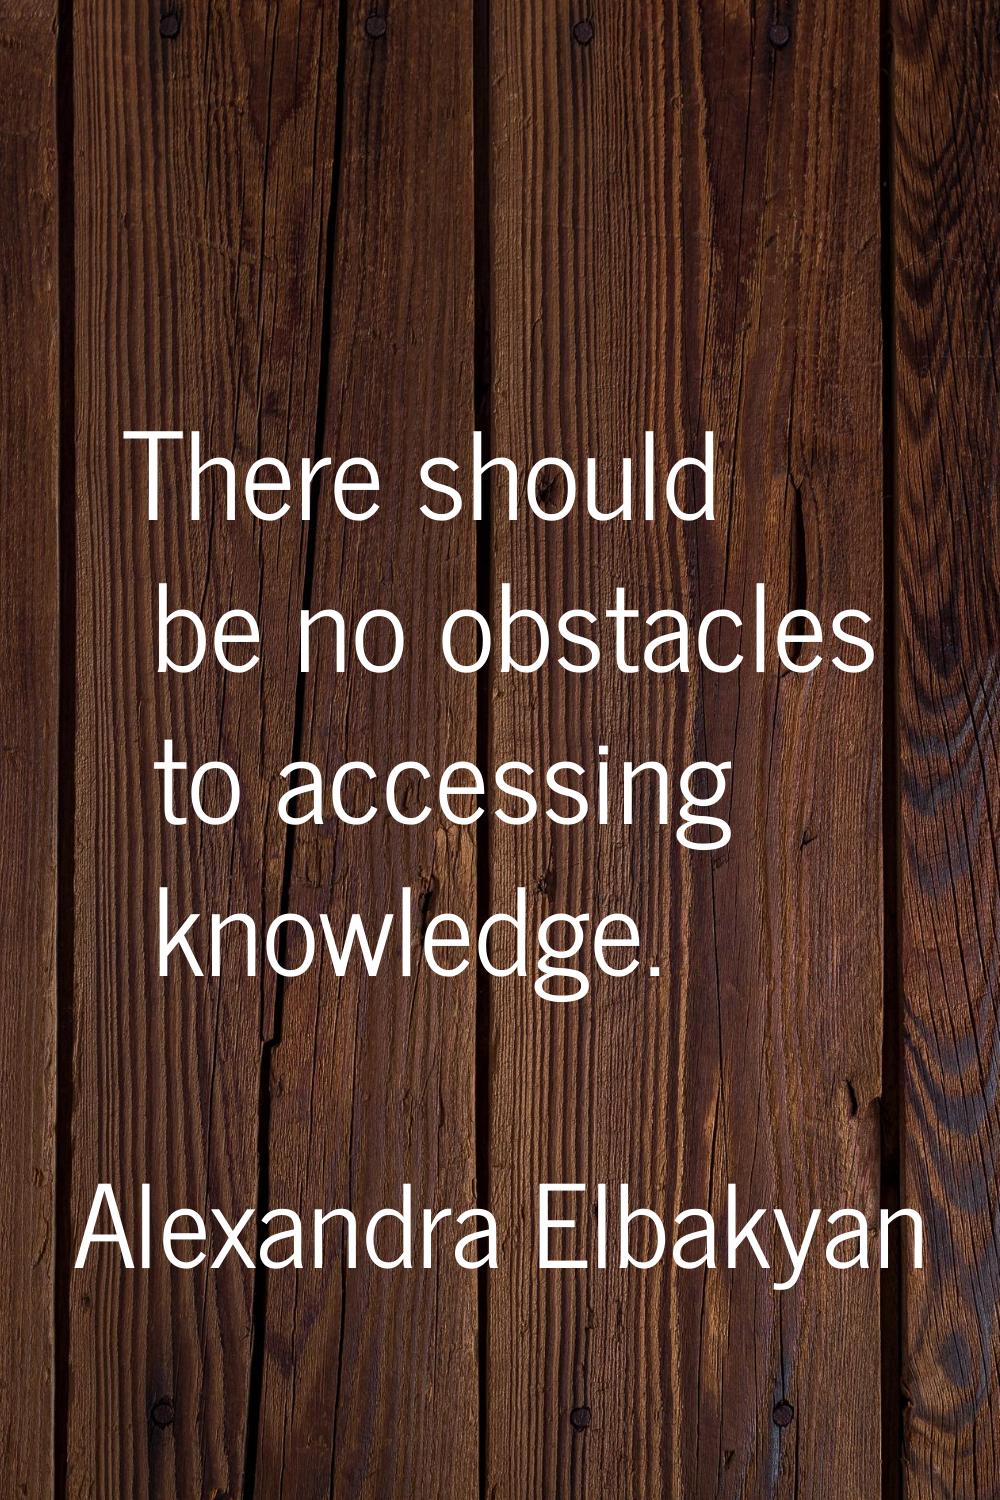 There should be no obstacles to accessing knowledge.